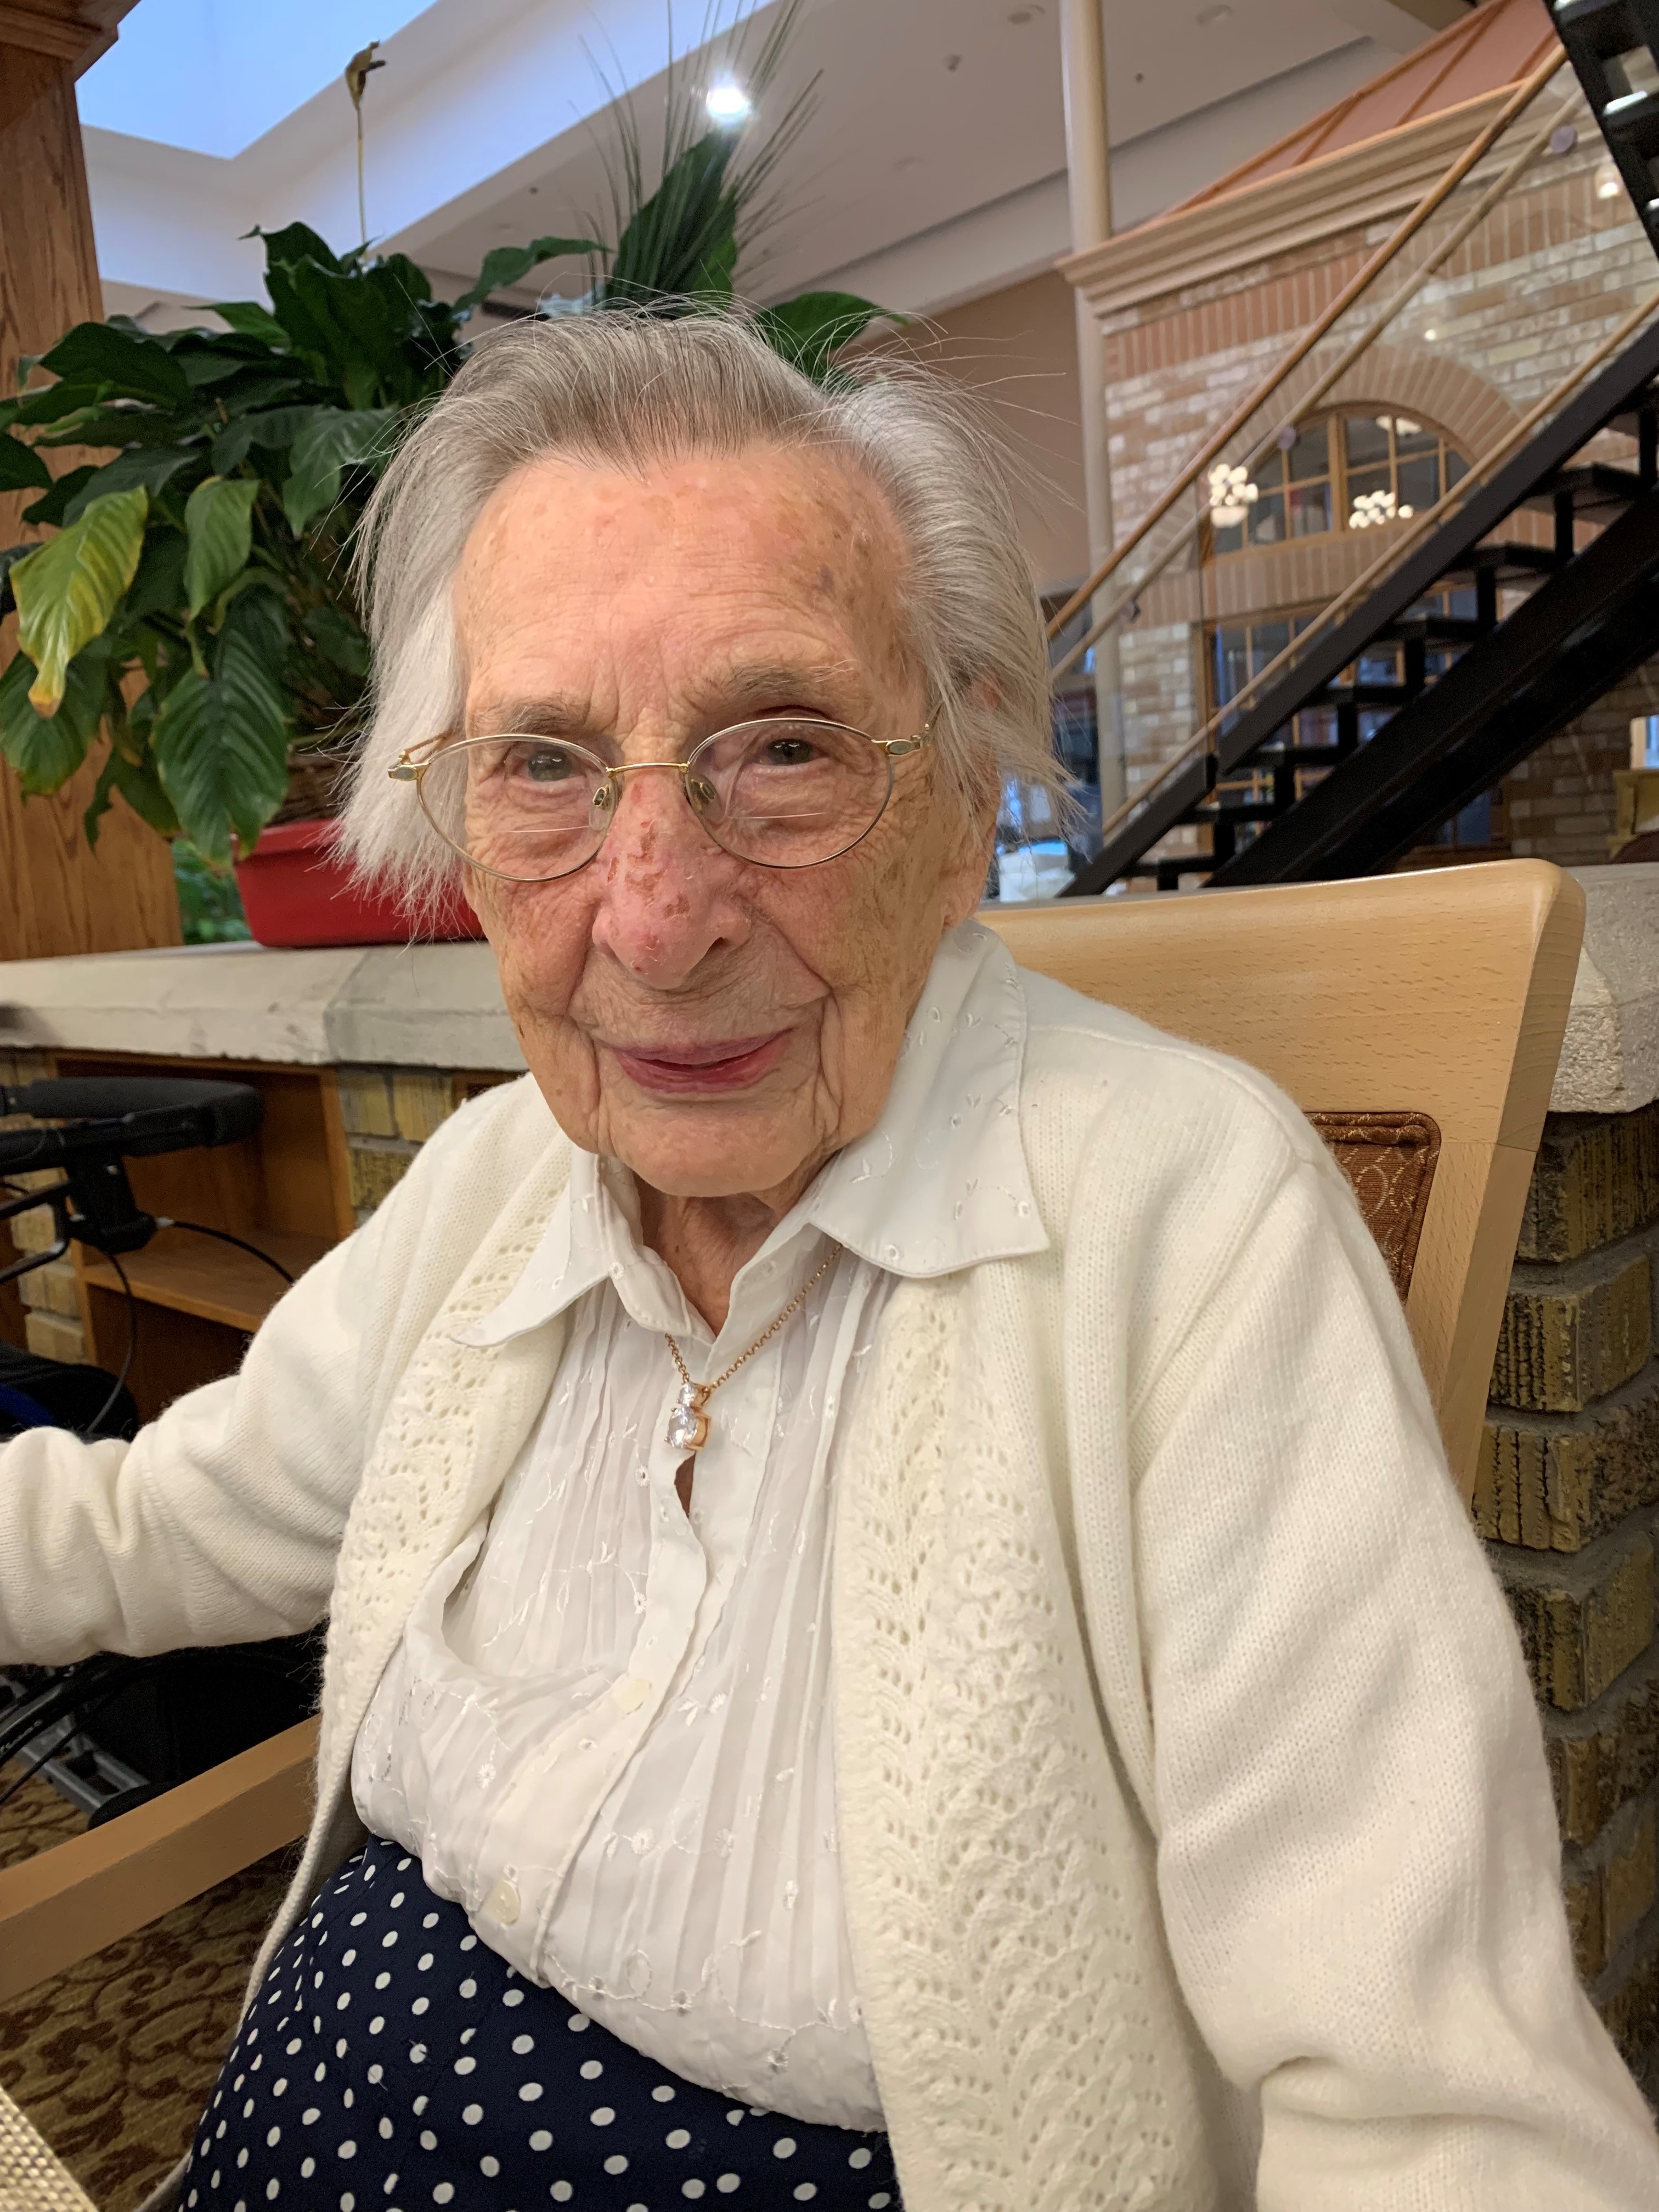 The team at Humber Heights is proud to honour Dorothy's 107th Birthday on February 18, 2022.